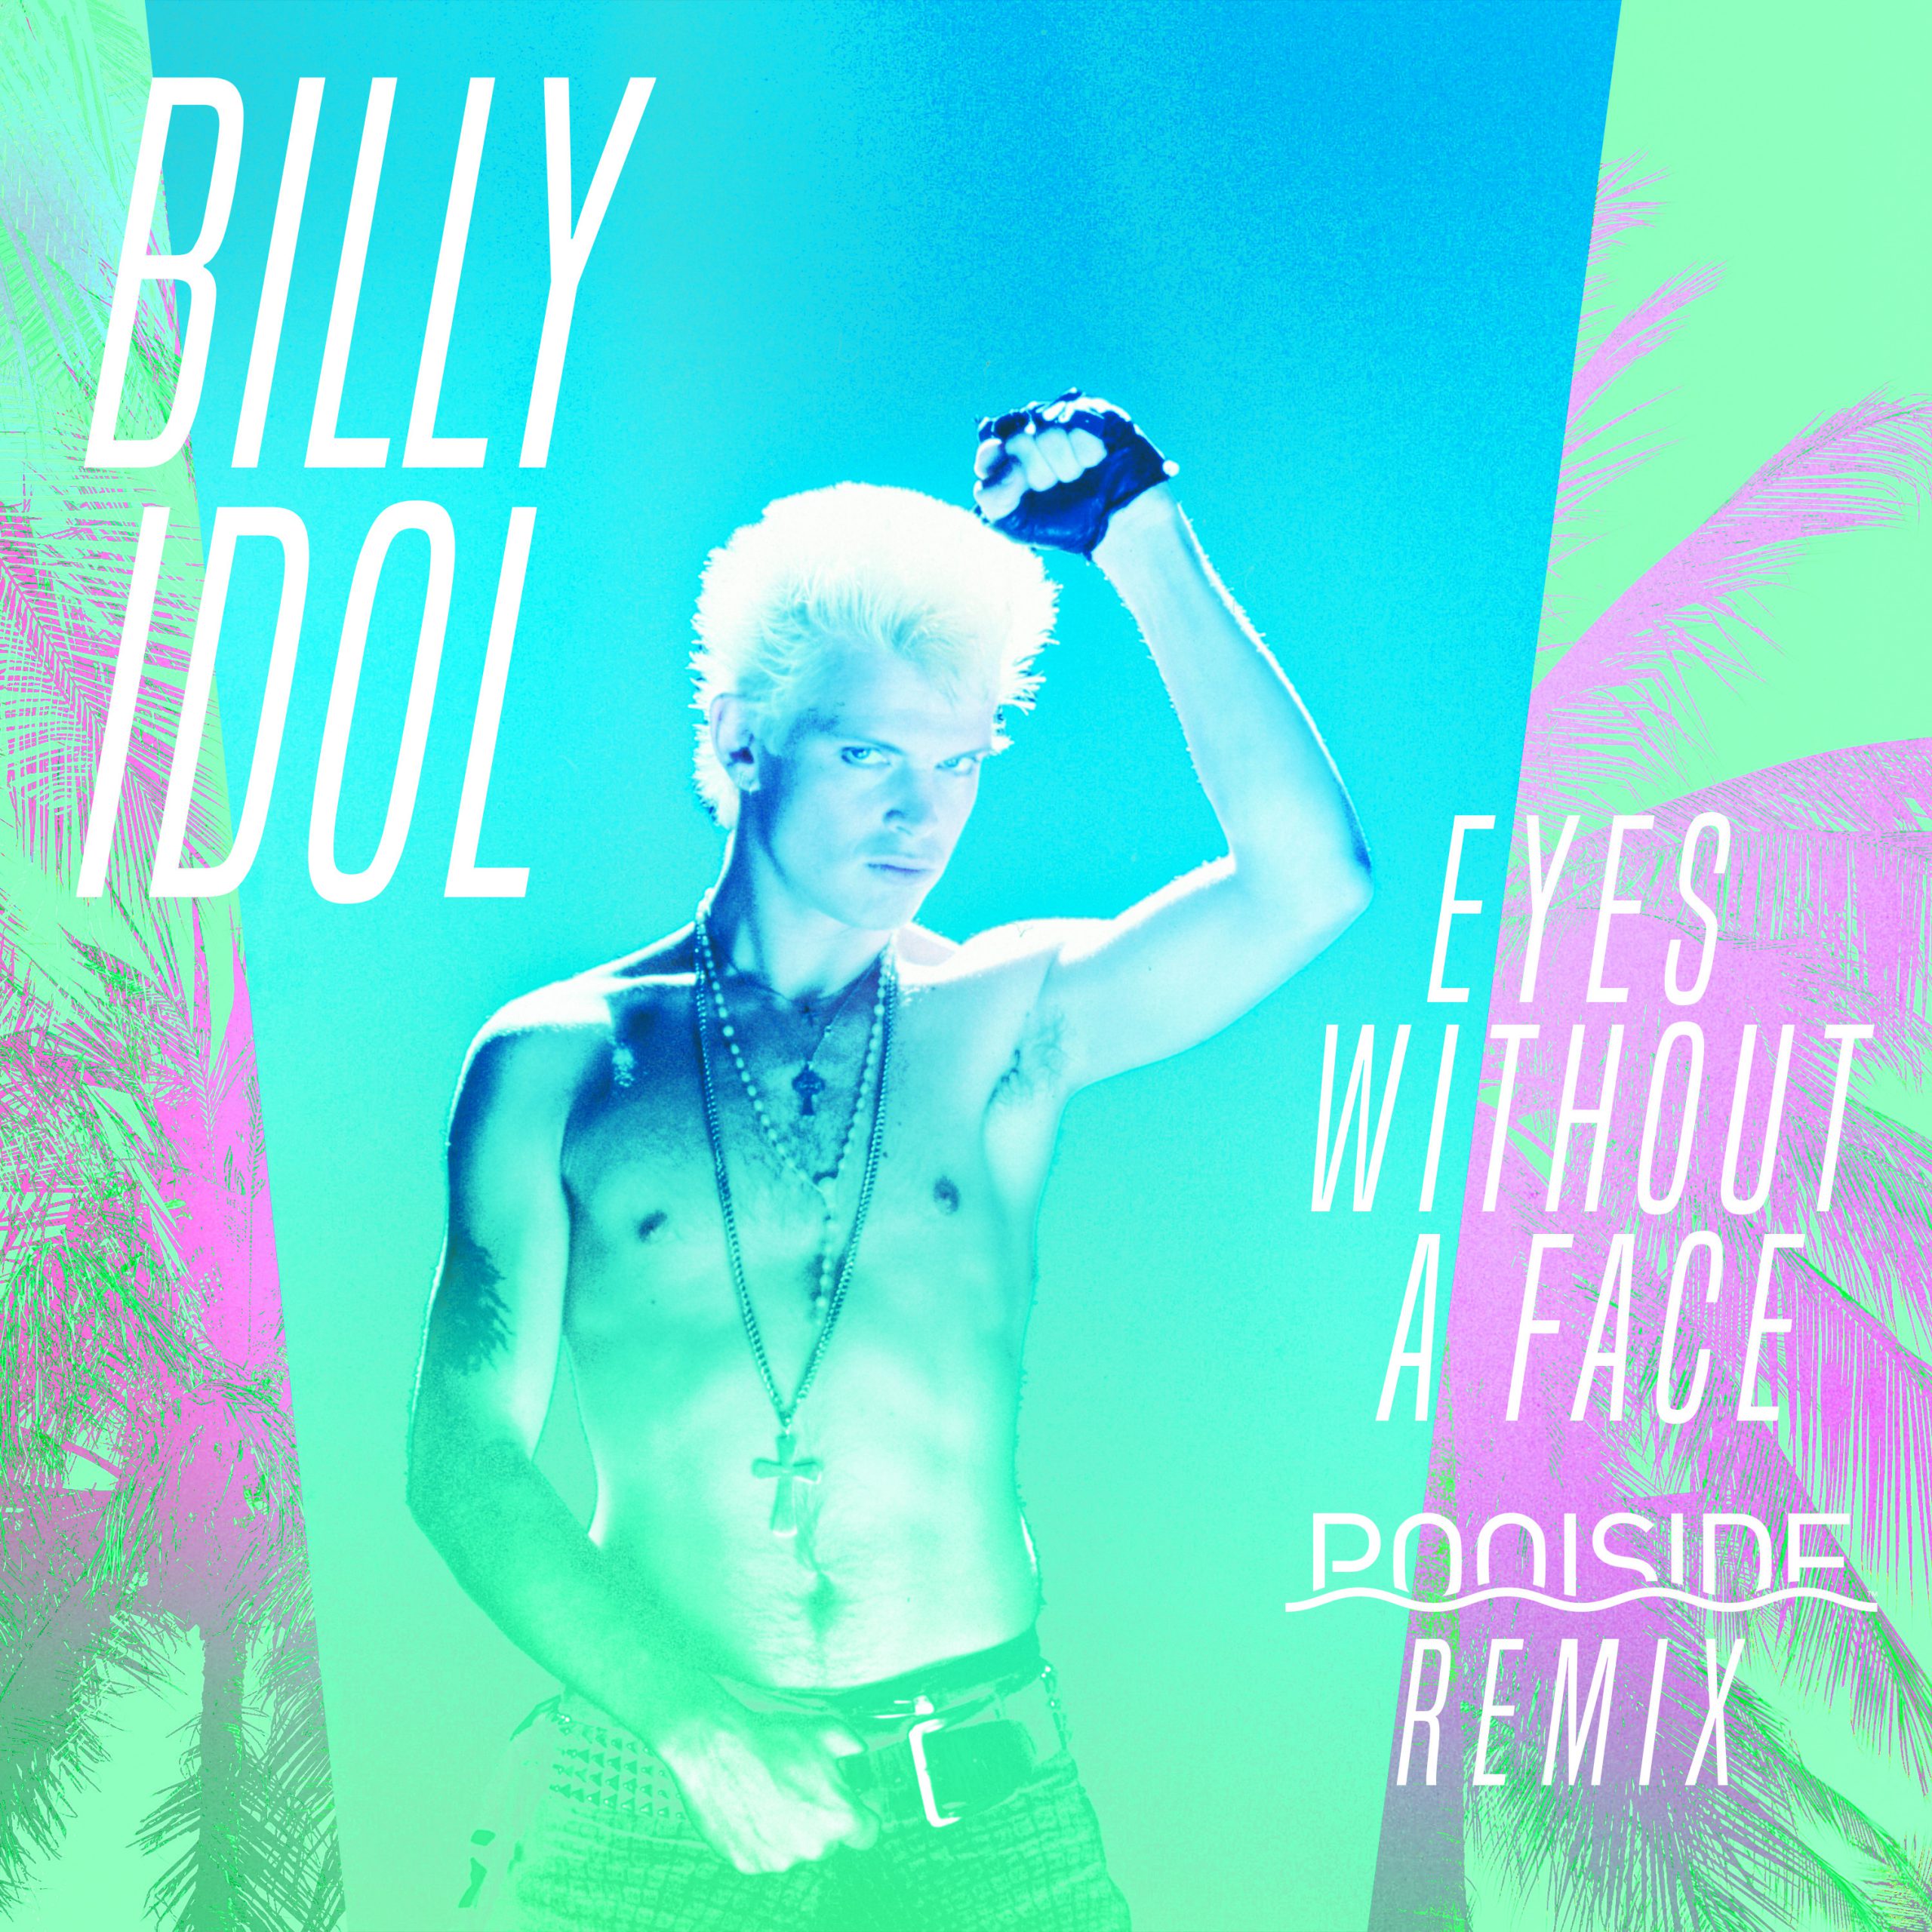 Billy Idol - Eyes Without A Face (Poolside Remix)